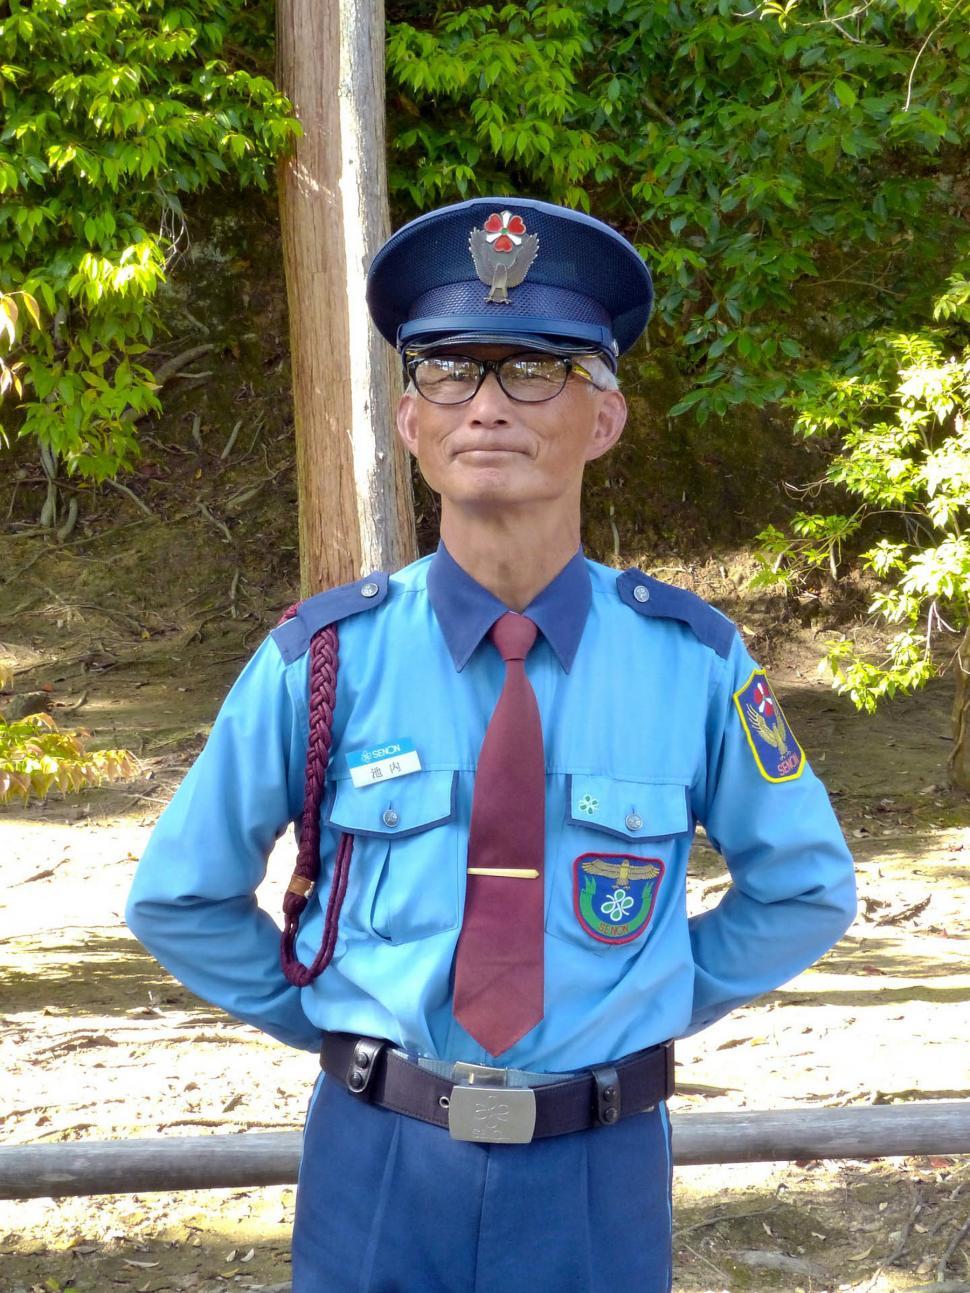 Free Image of Man in Blue Uniform Standing in Front of Fence 